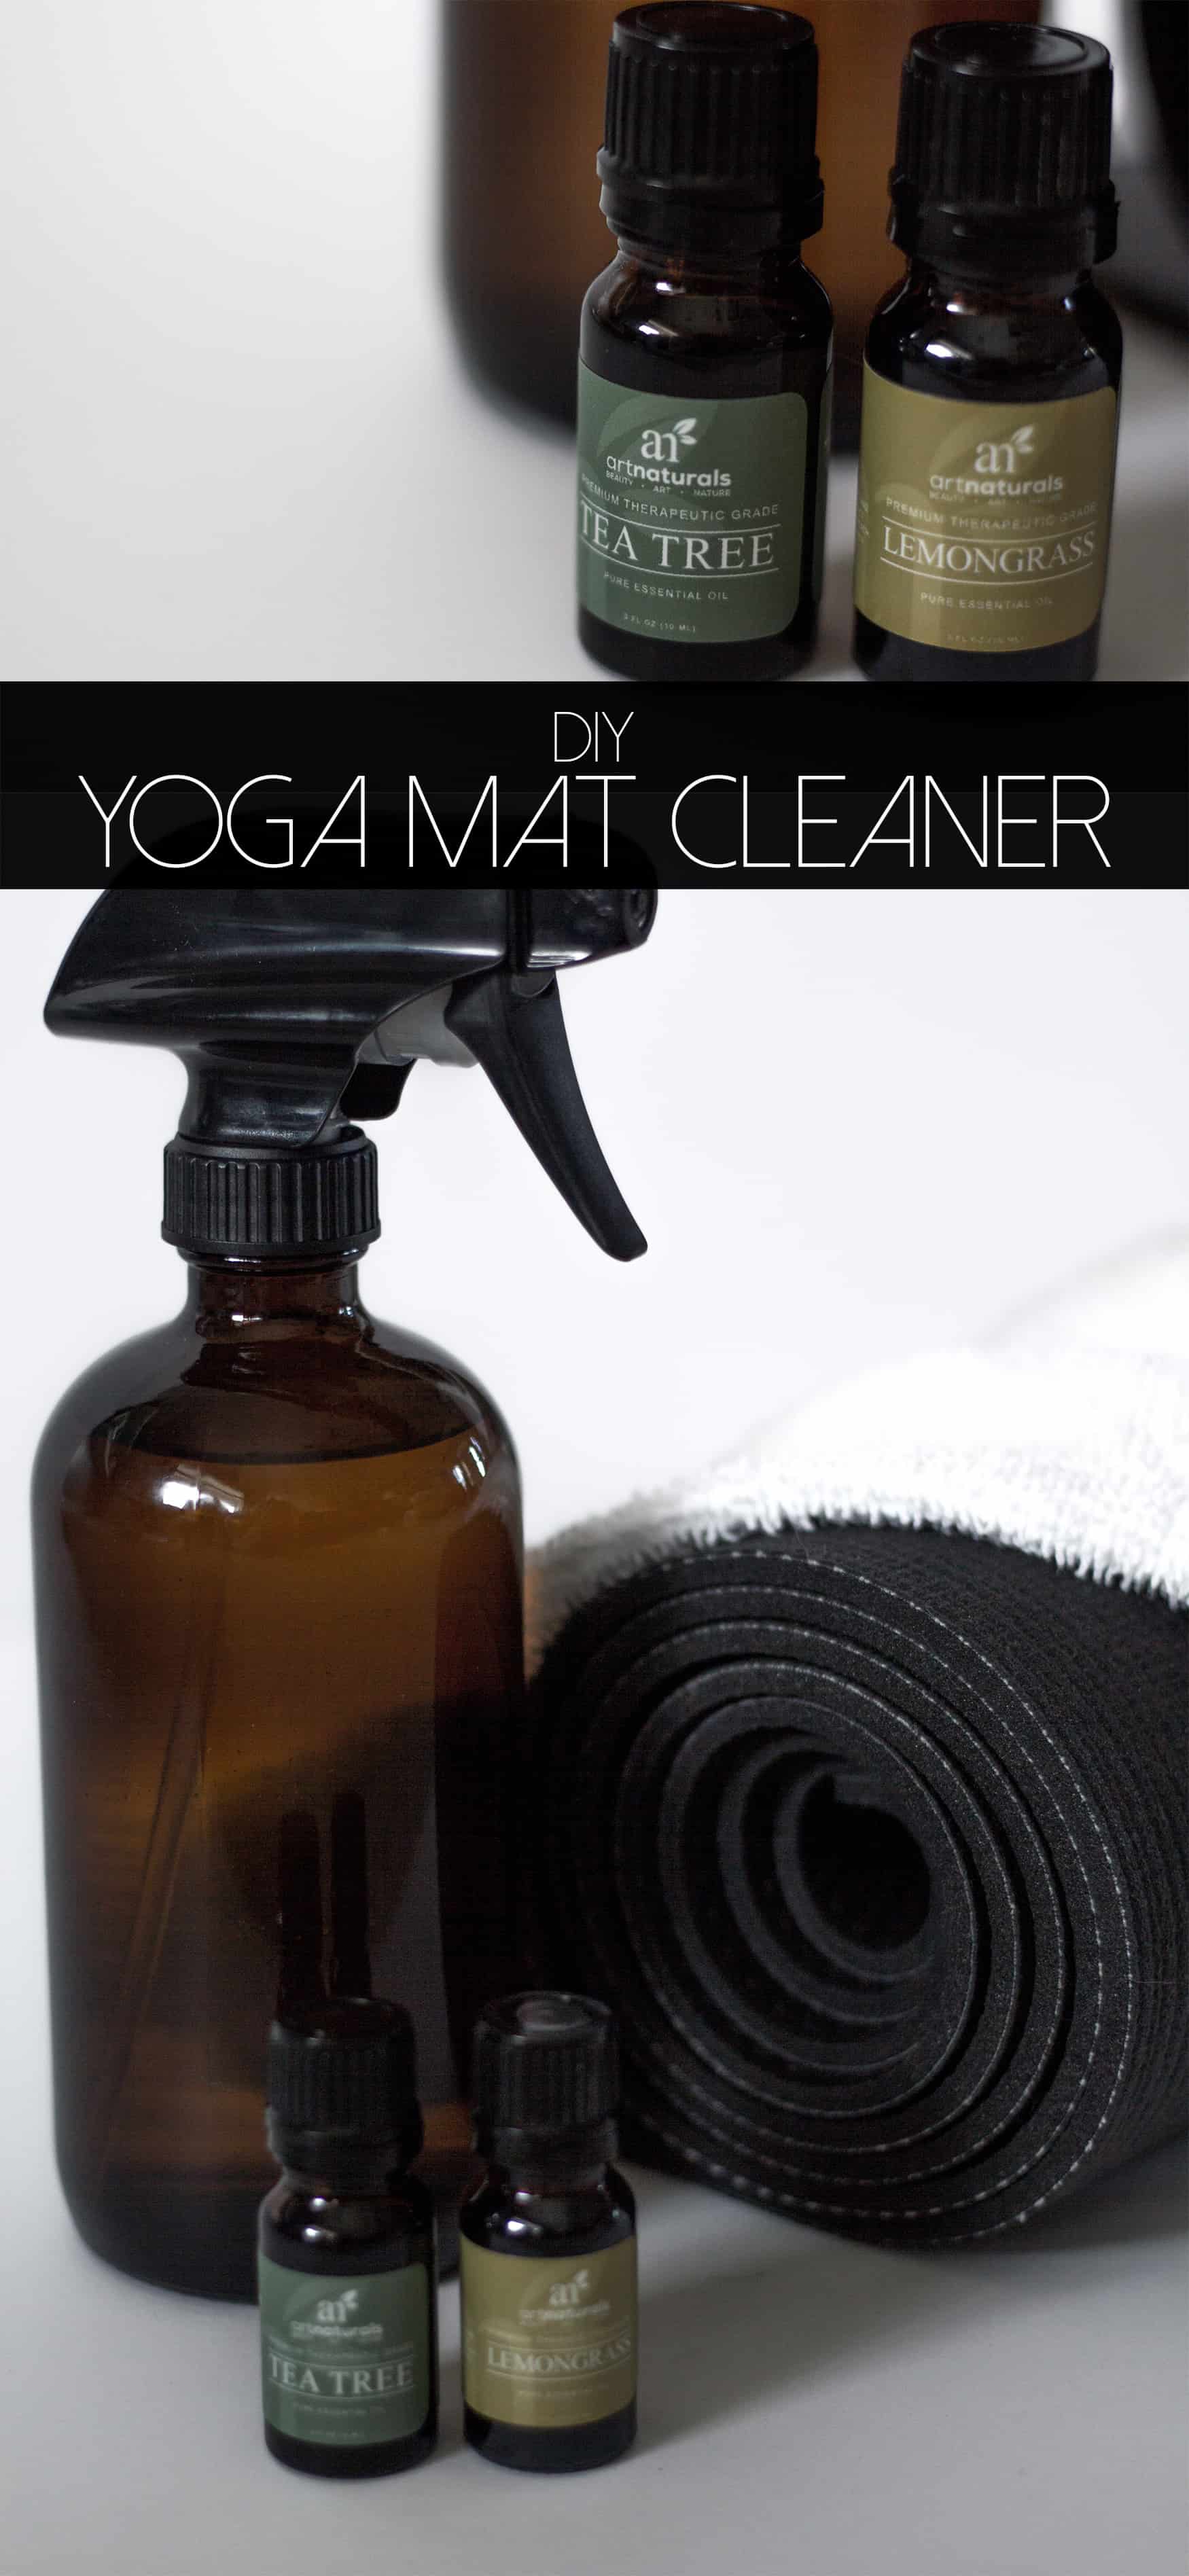 It's so important to keep your yoga mat clean. Turns out it's super easy too with this yoga mat cleaner!